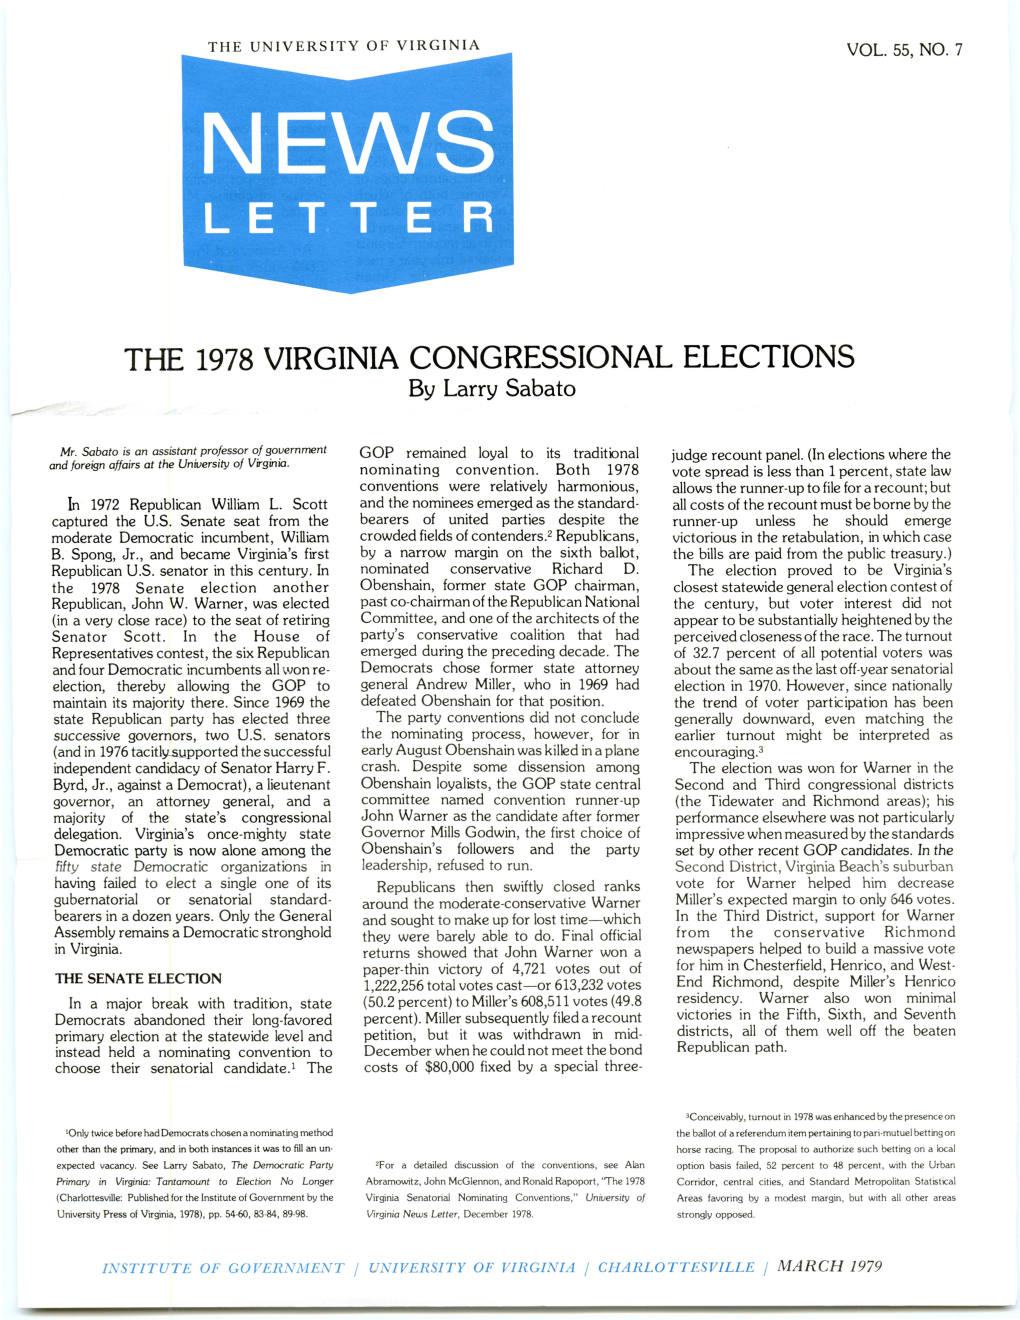 THE 1978 VIRGINIA CONGRESSIONAL ELECTIONS by Larry Sabato